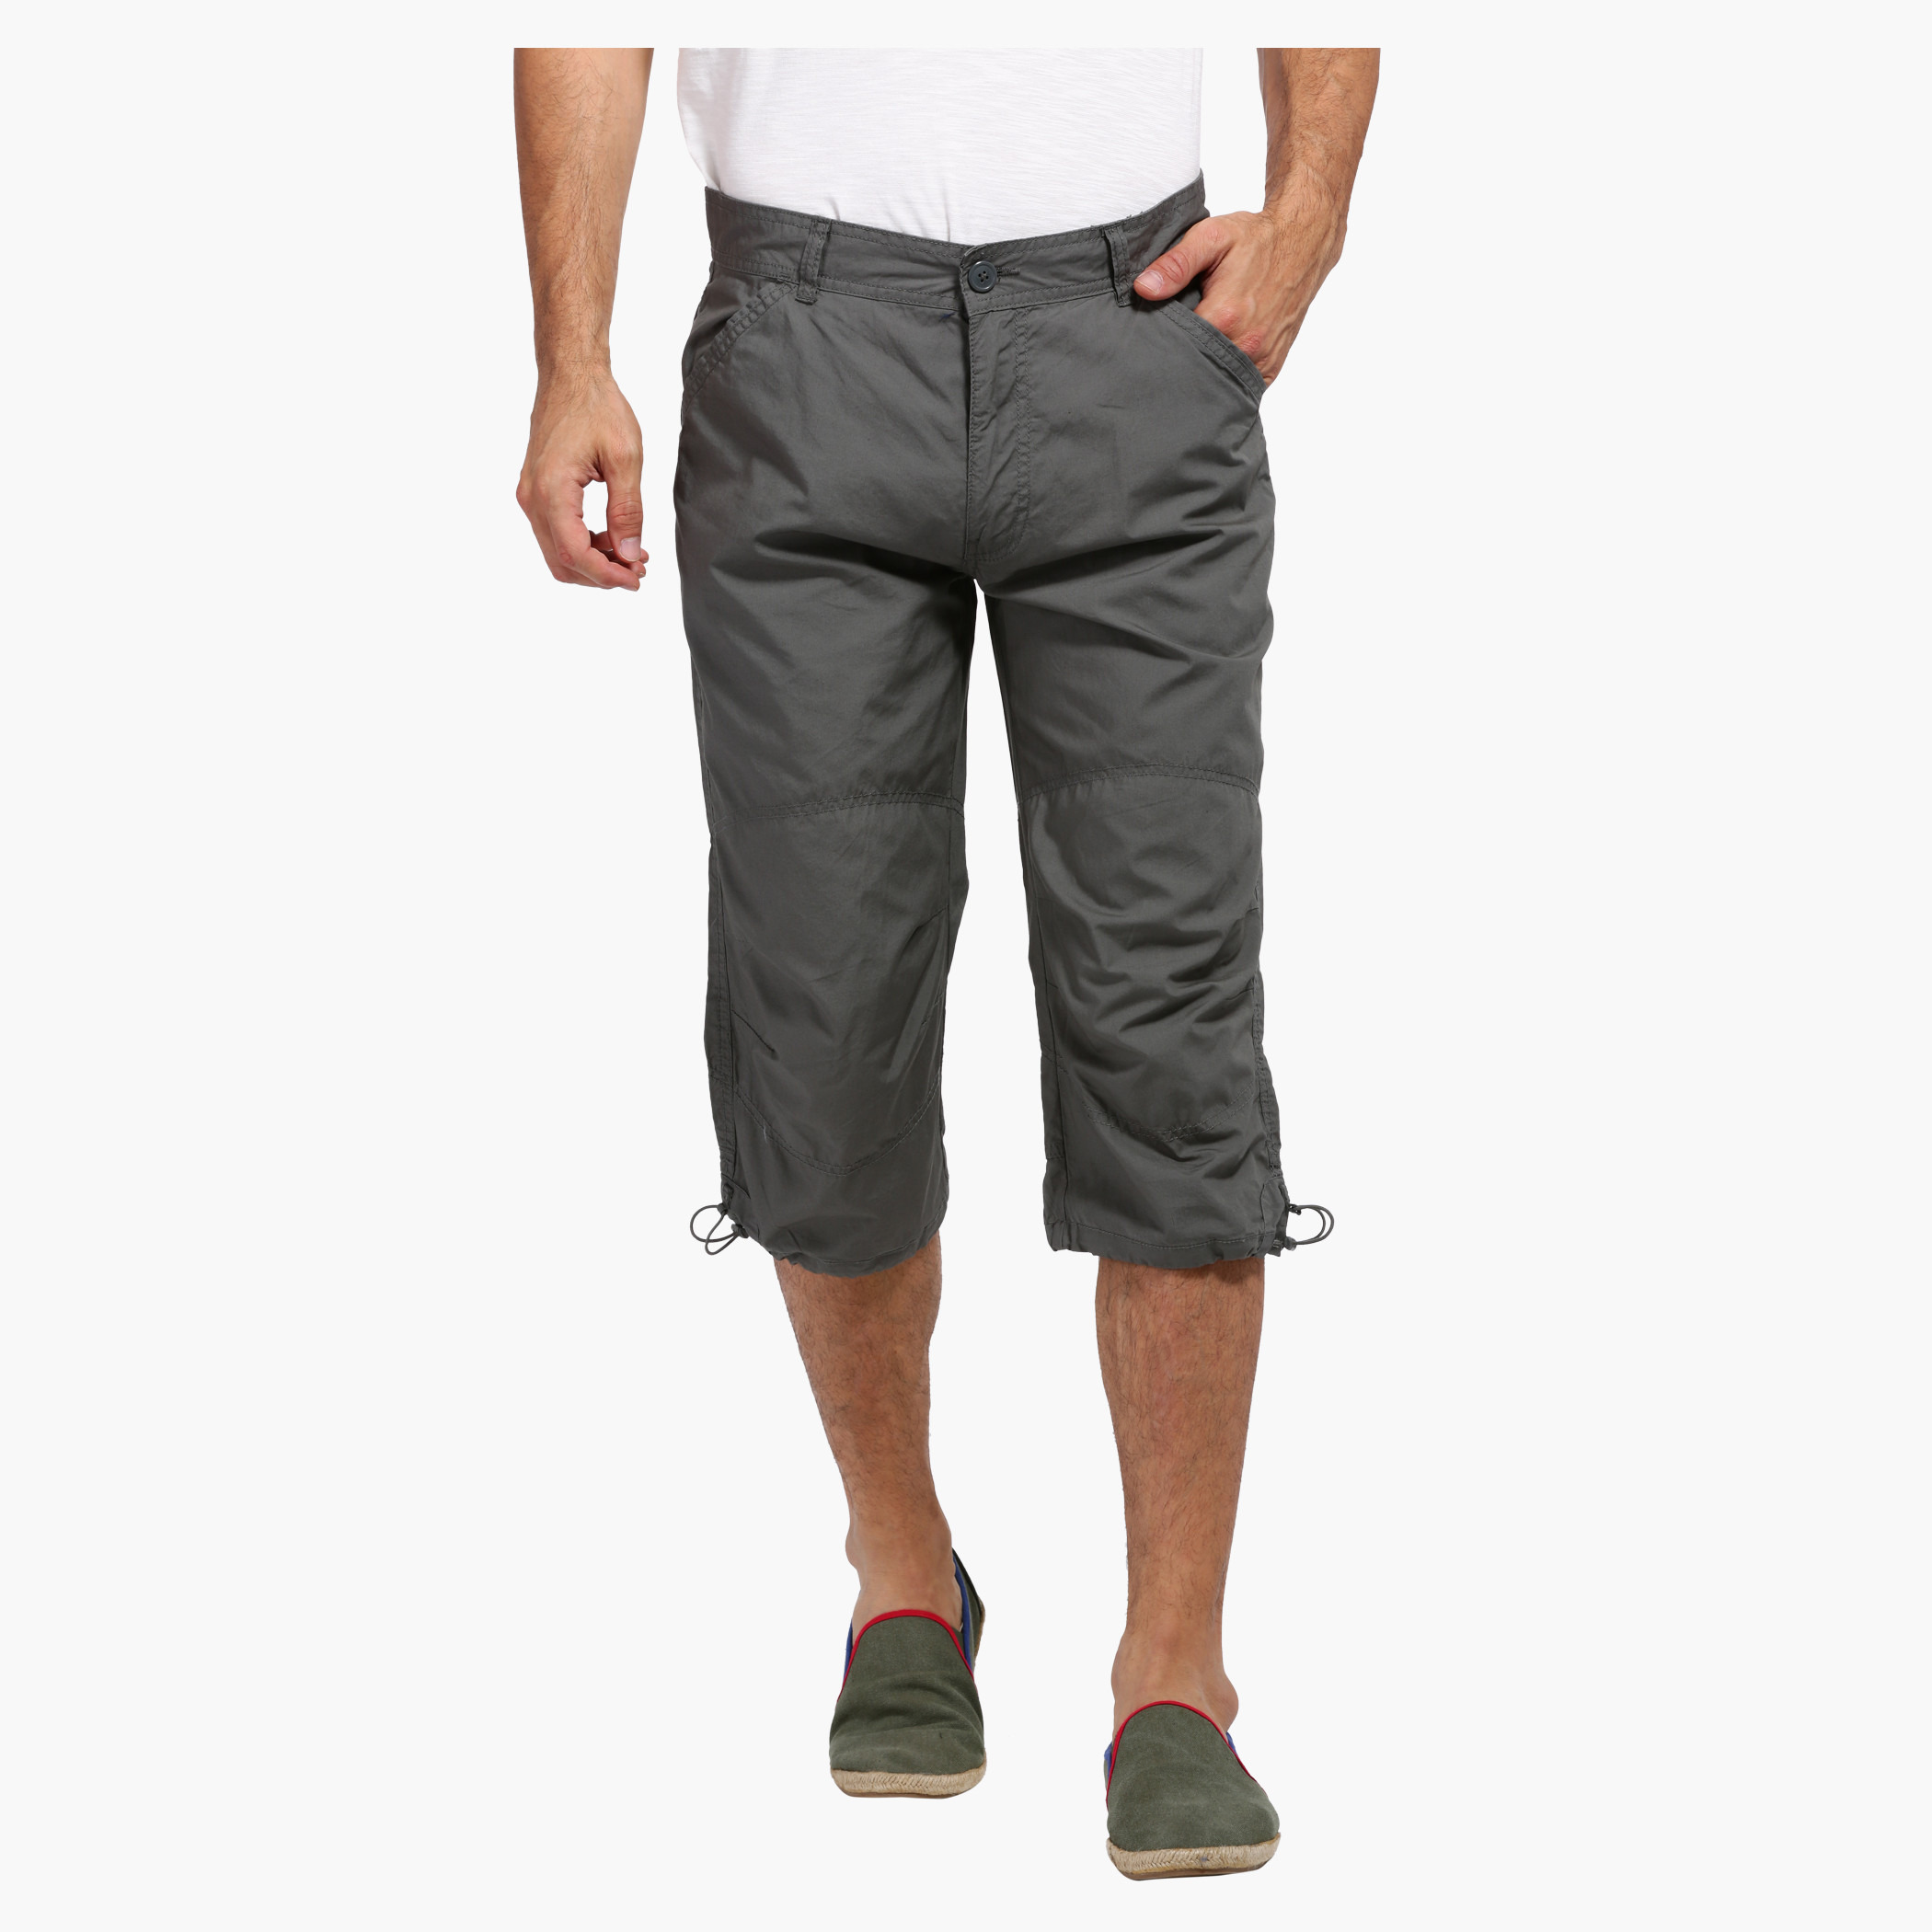 3 4 Cargo Pant - Buy 3 4 Cargo Pant online in India